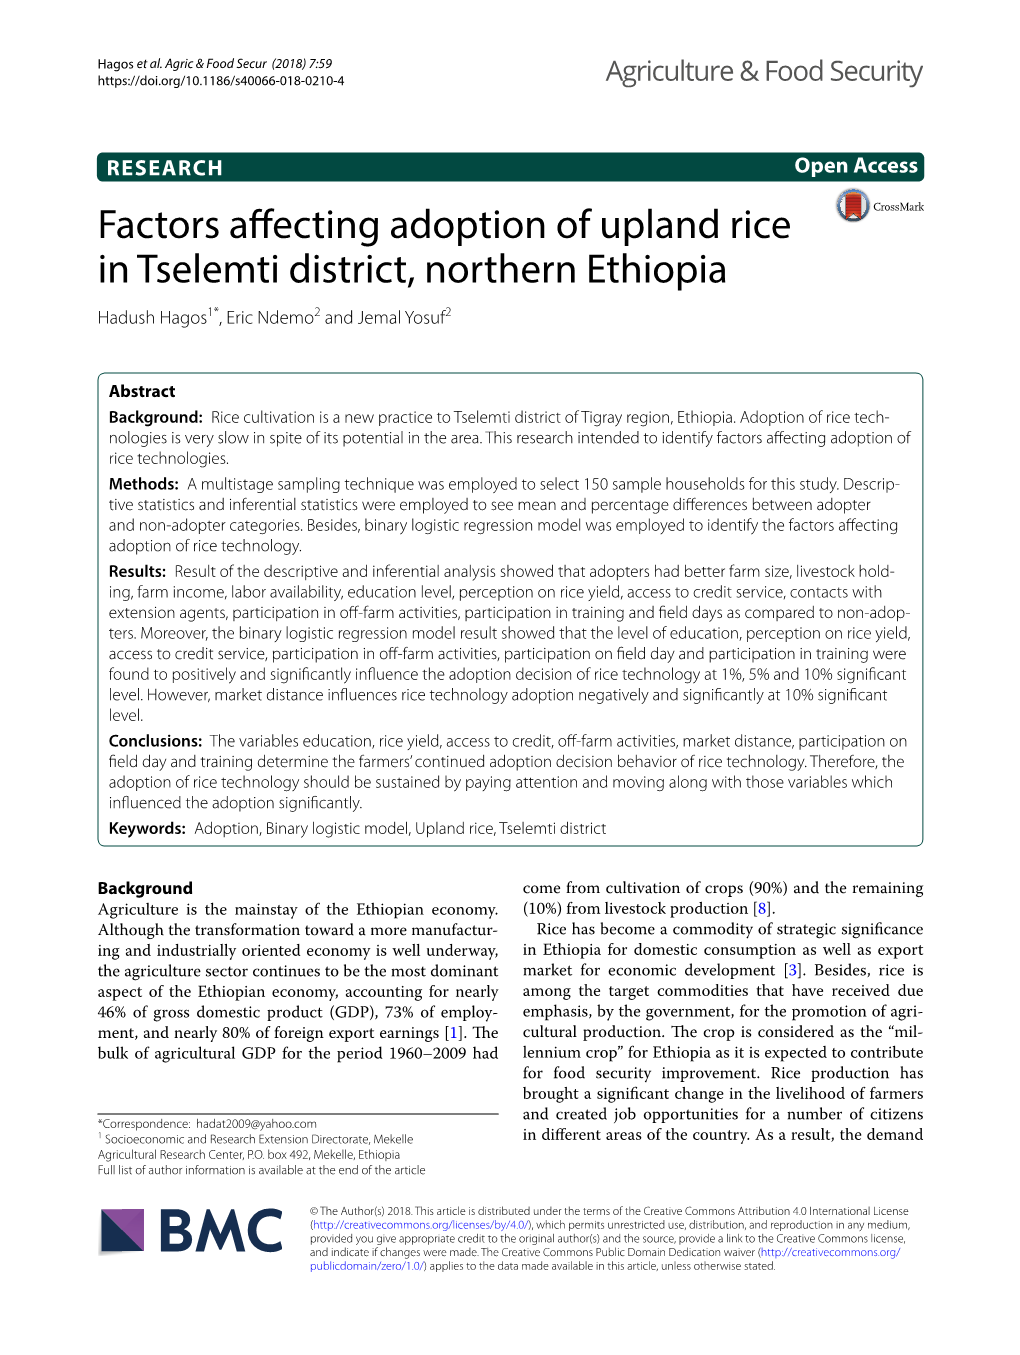 Factors Affecting Adoption of Upland Rice in Tselemti District, Northern